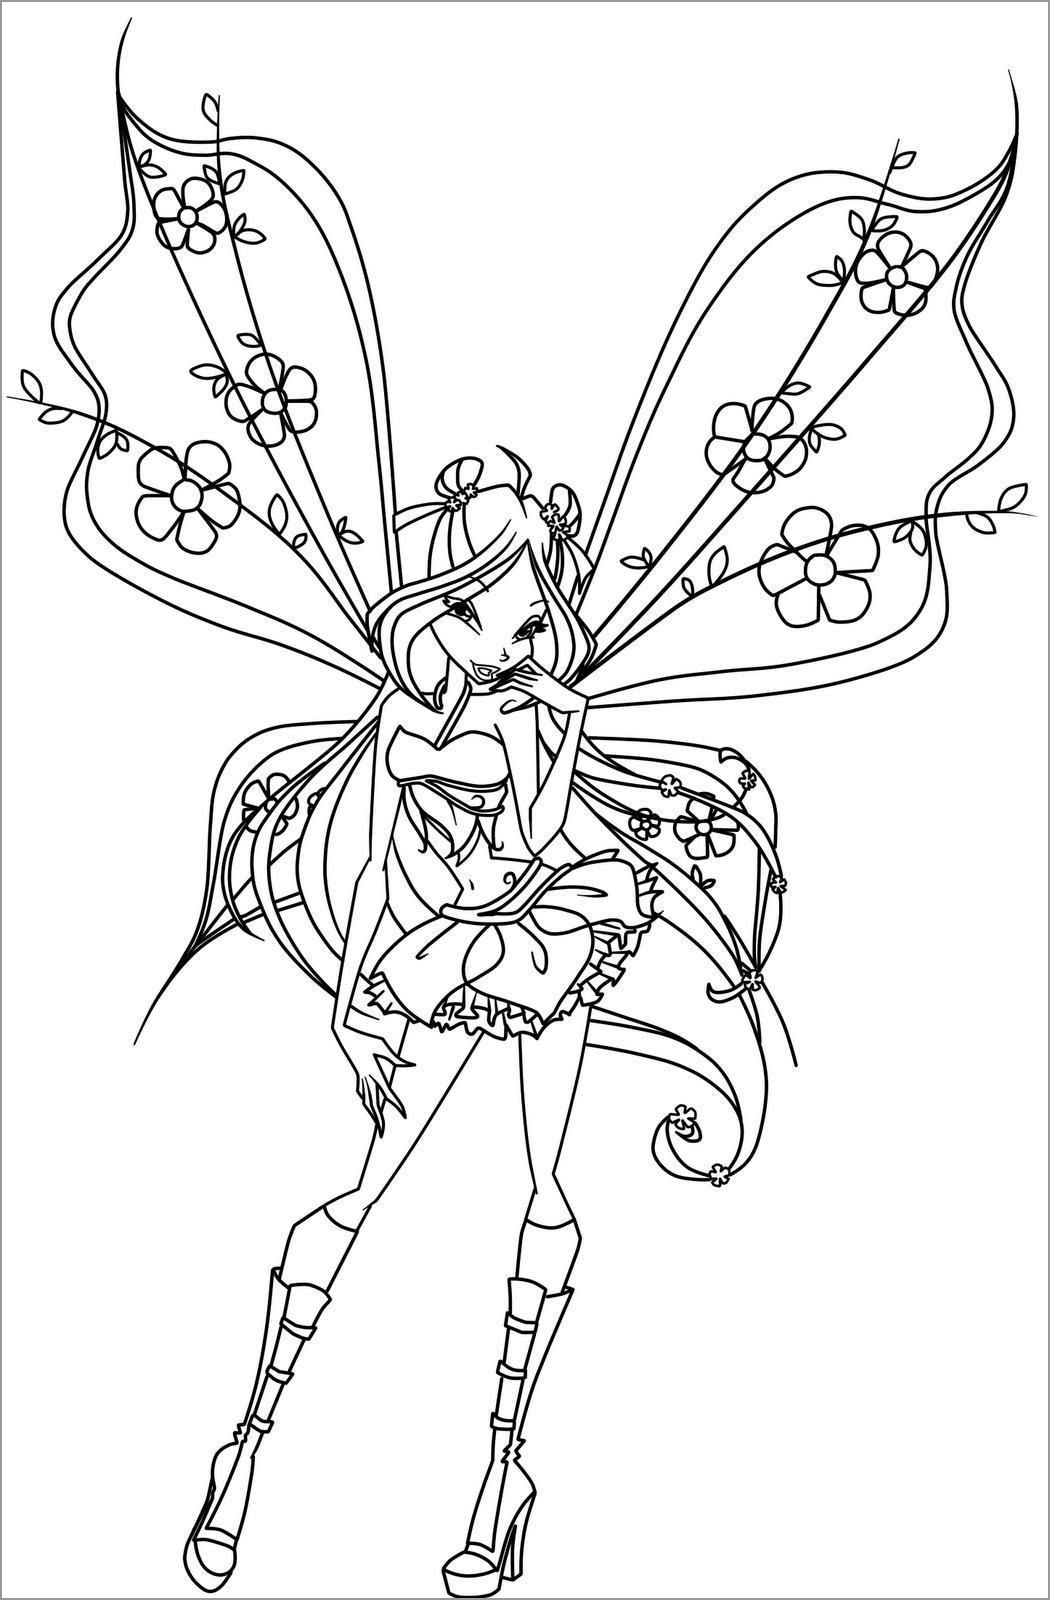 Fairy Winx Club Fairy Coloring Page - ColoringBay